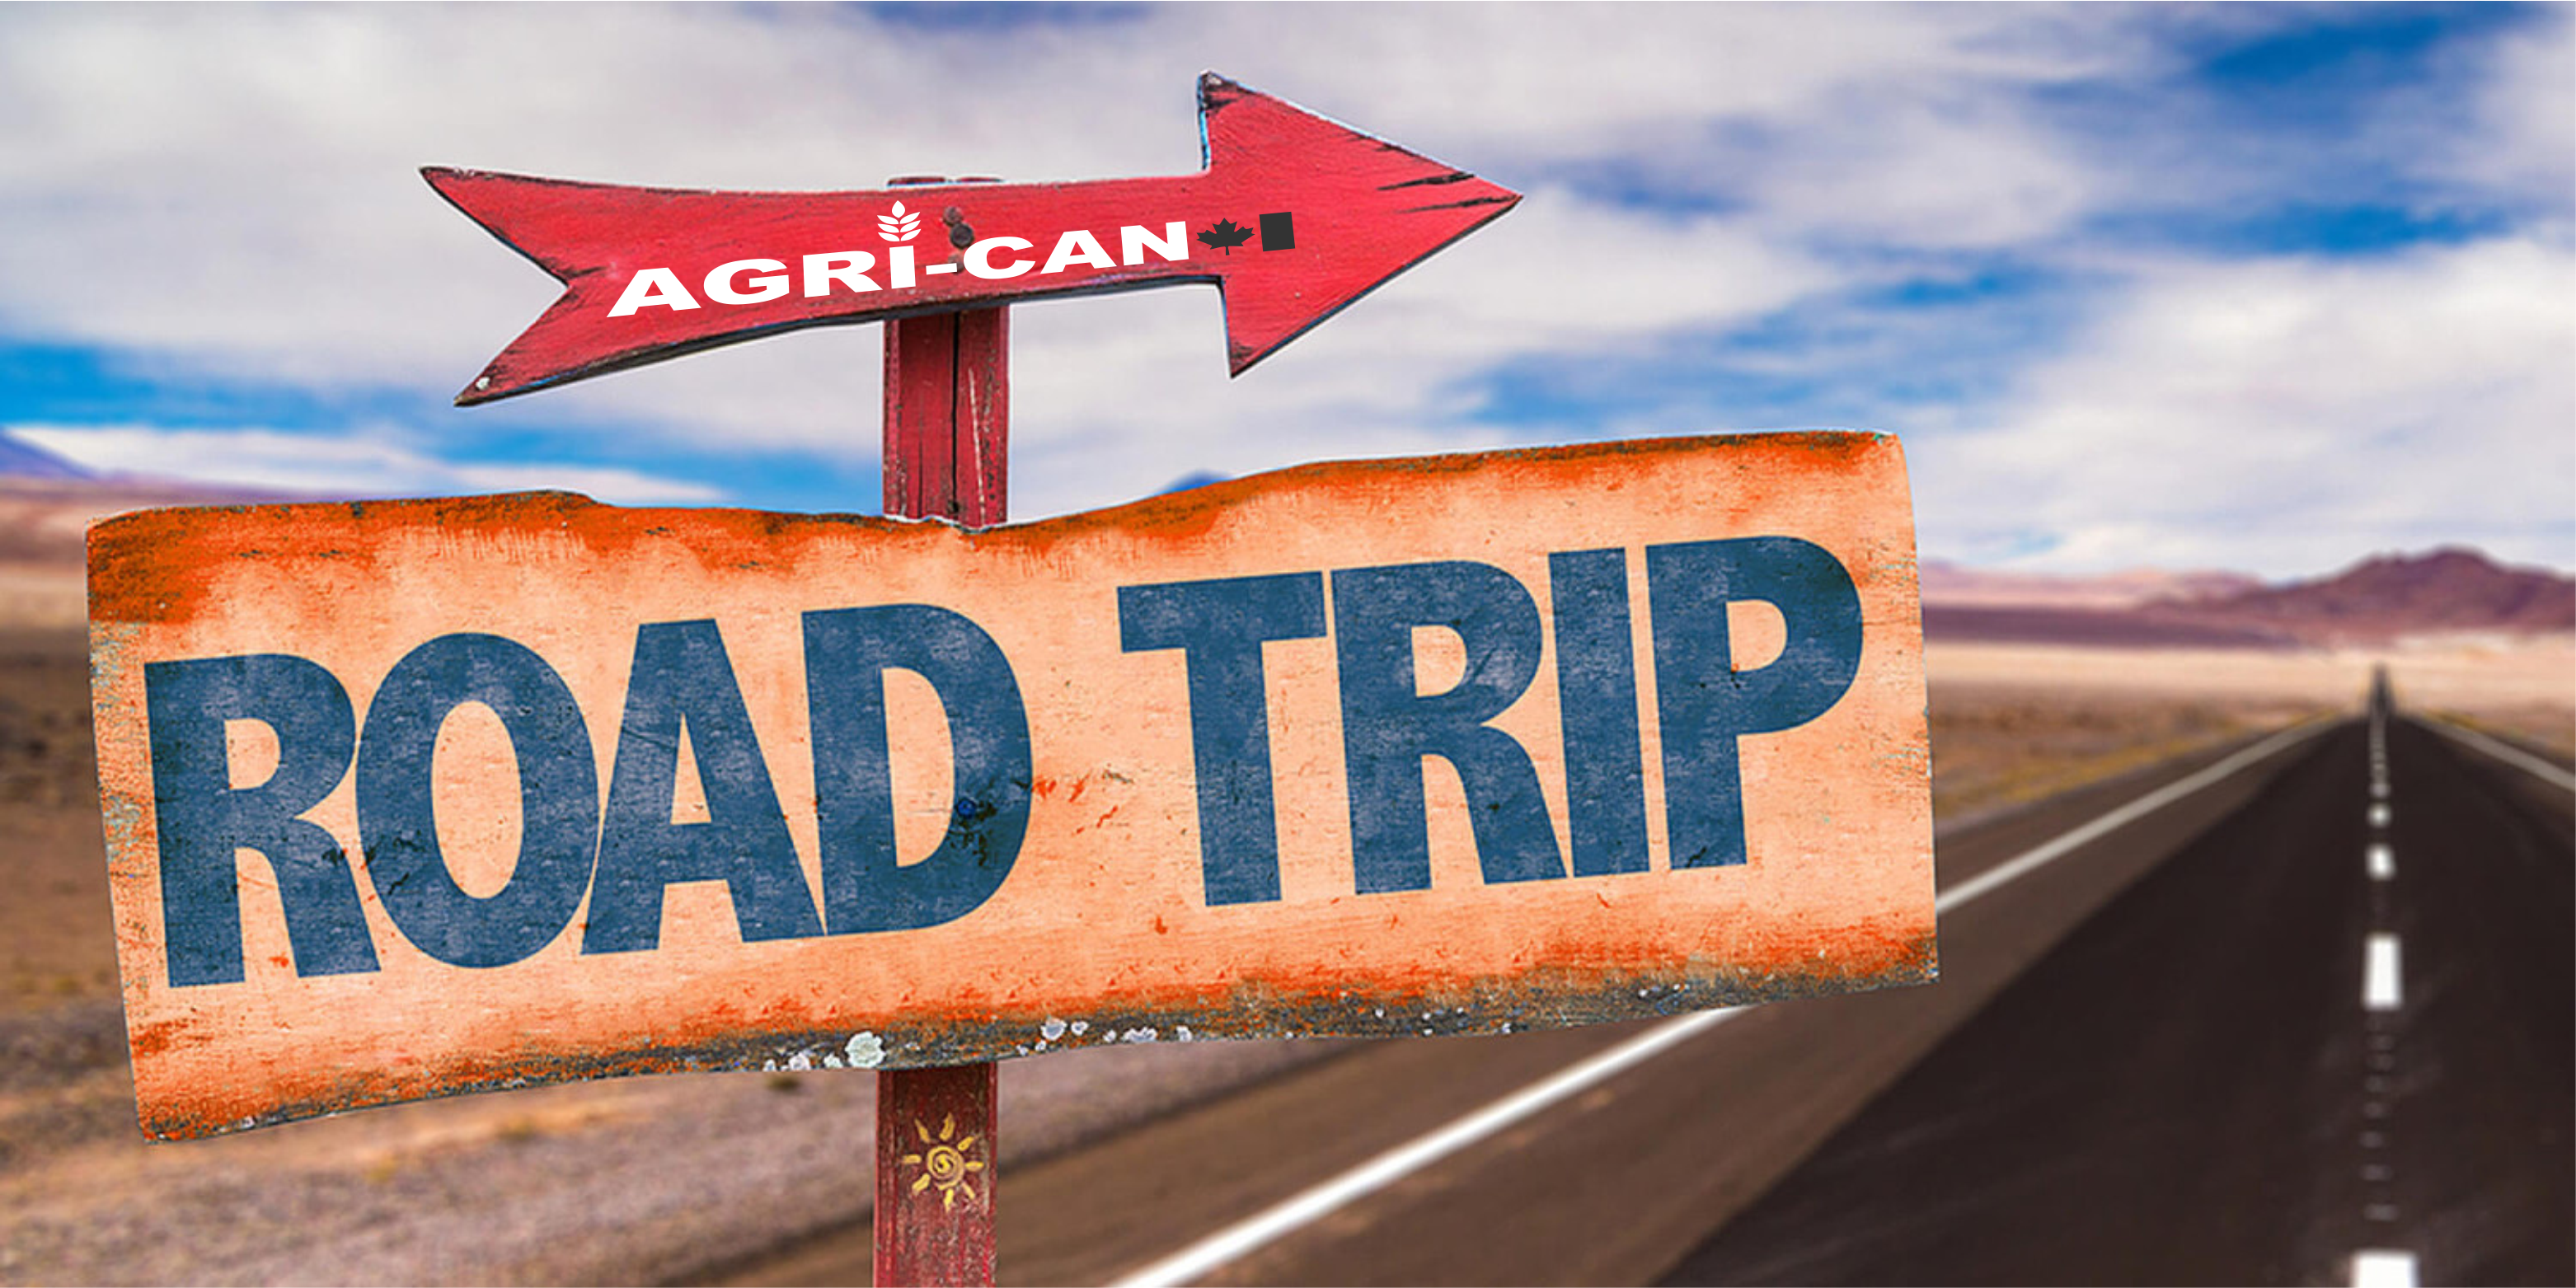 Let's take a road trip with Agri-Can